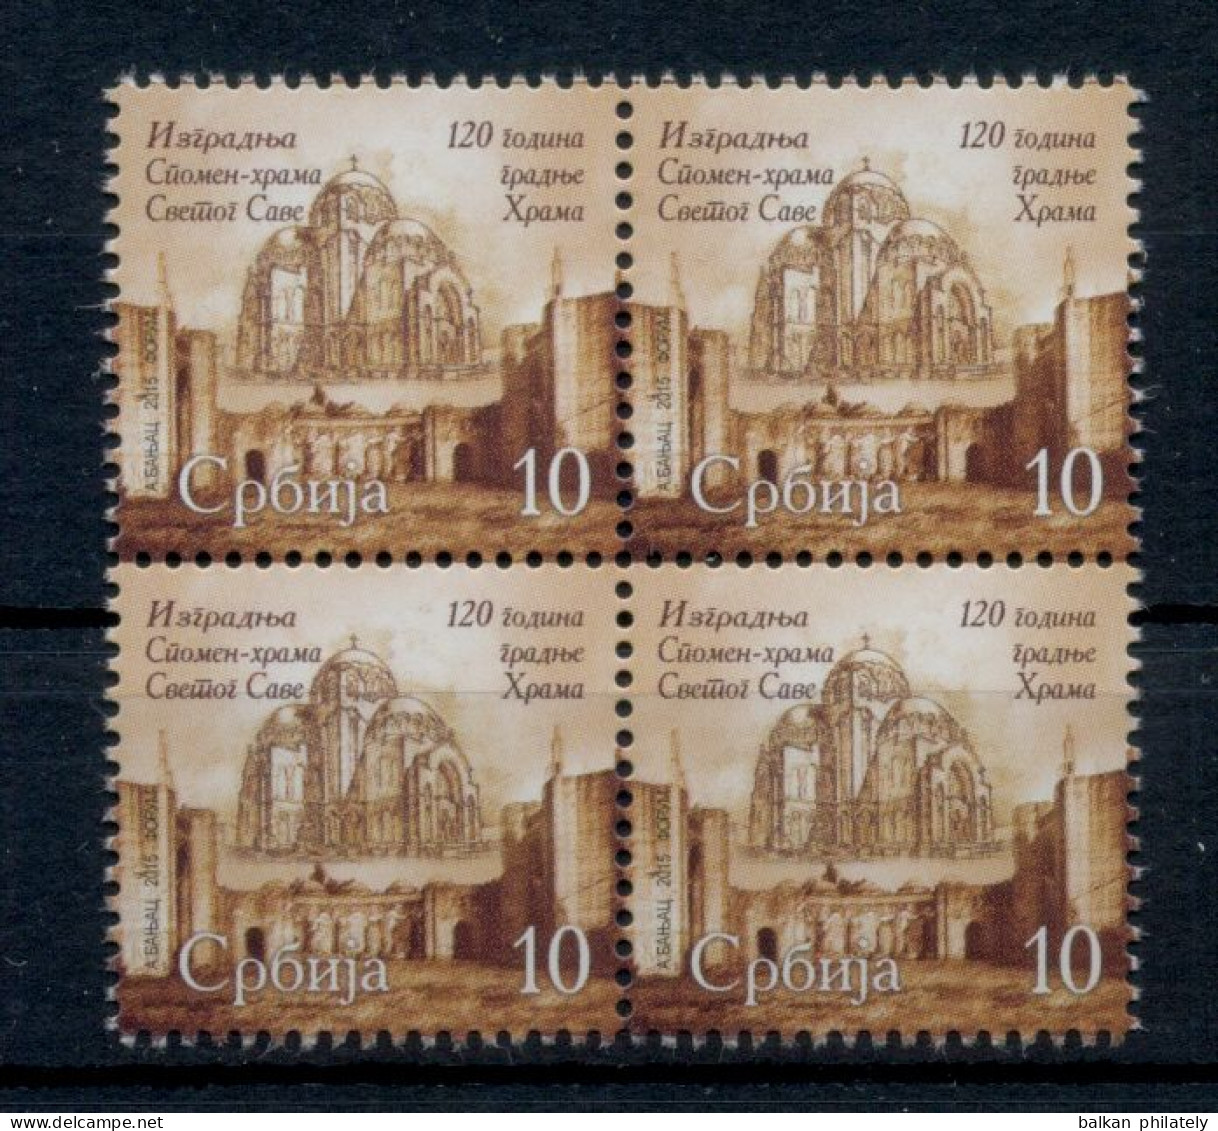 Serbia 2015 120 Years Of Construction The Temple Of Saint Sava Religions Christianity Church Tax Charity Surcharge MNH - Serbia